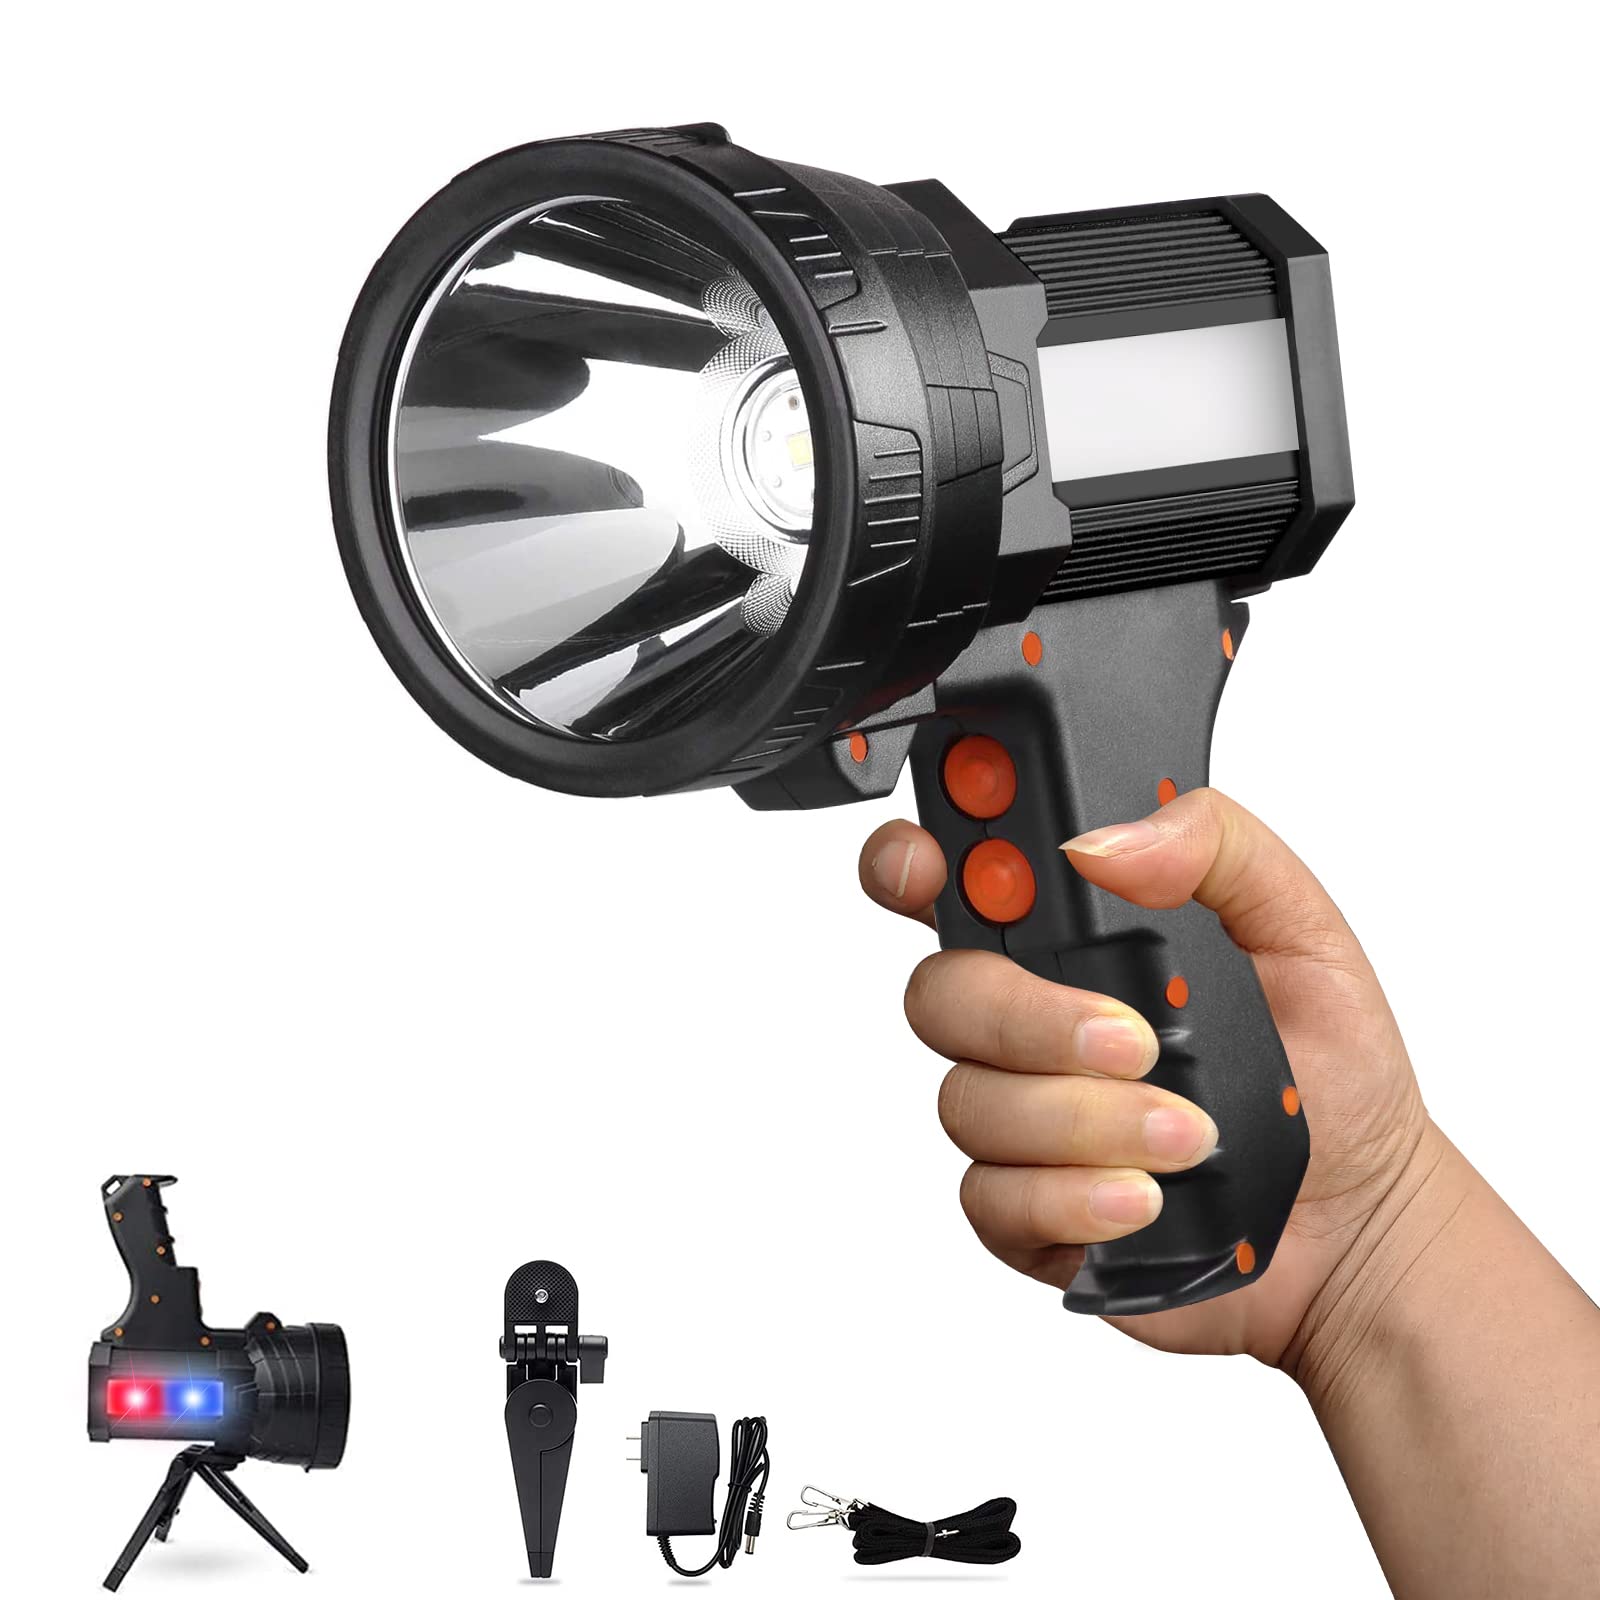 Spotlight Flashlight, Super Bright 10000 Lumens Rechargeable Spotlight LED Flashlight 10000mah Long Lasting Large Searchlight Torchlight for Flood Fishing Hiking Camping,with Tripod, Shoulder Strap.